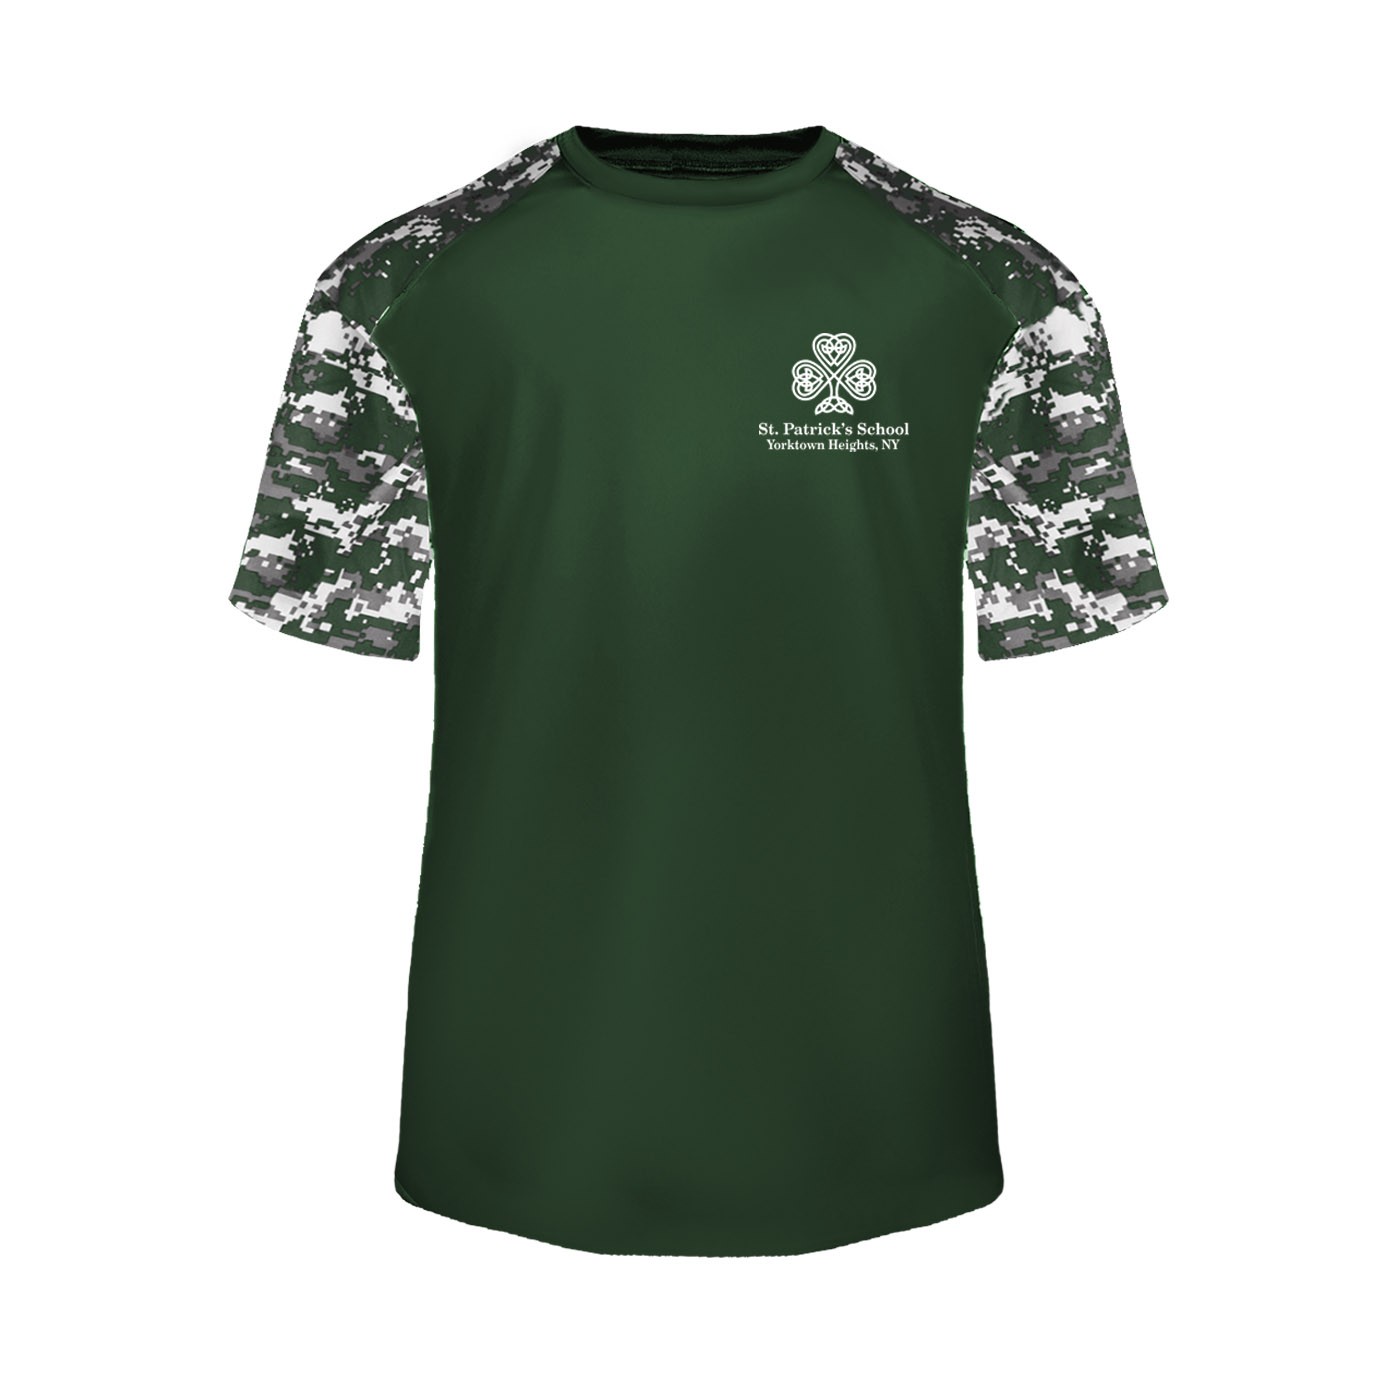 SPS Spirit S/S Digital Camo T-Shirt w/ Left Crest Logo - Please Allow 2-3 Weeks for Delivery